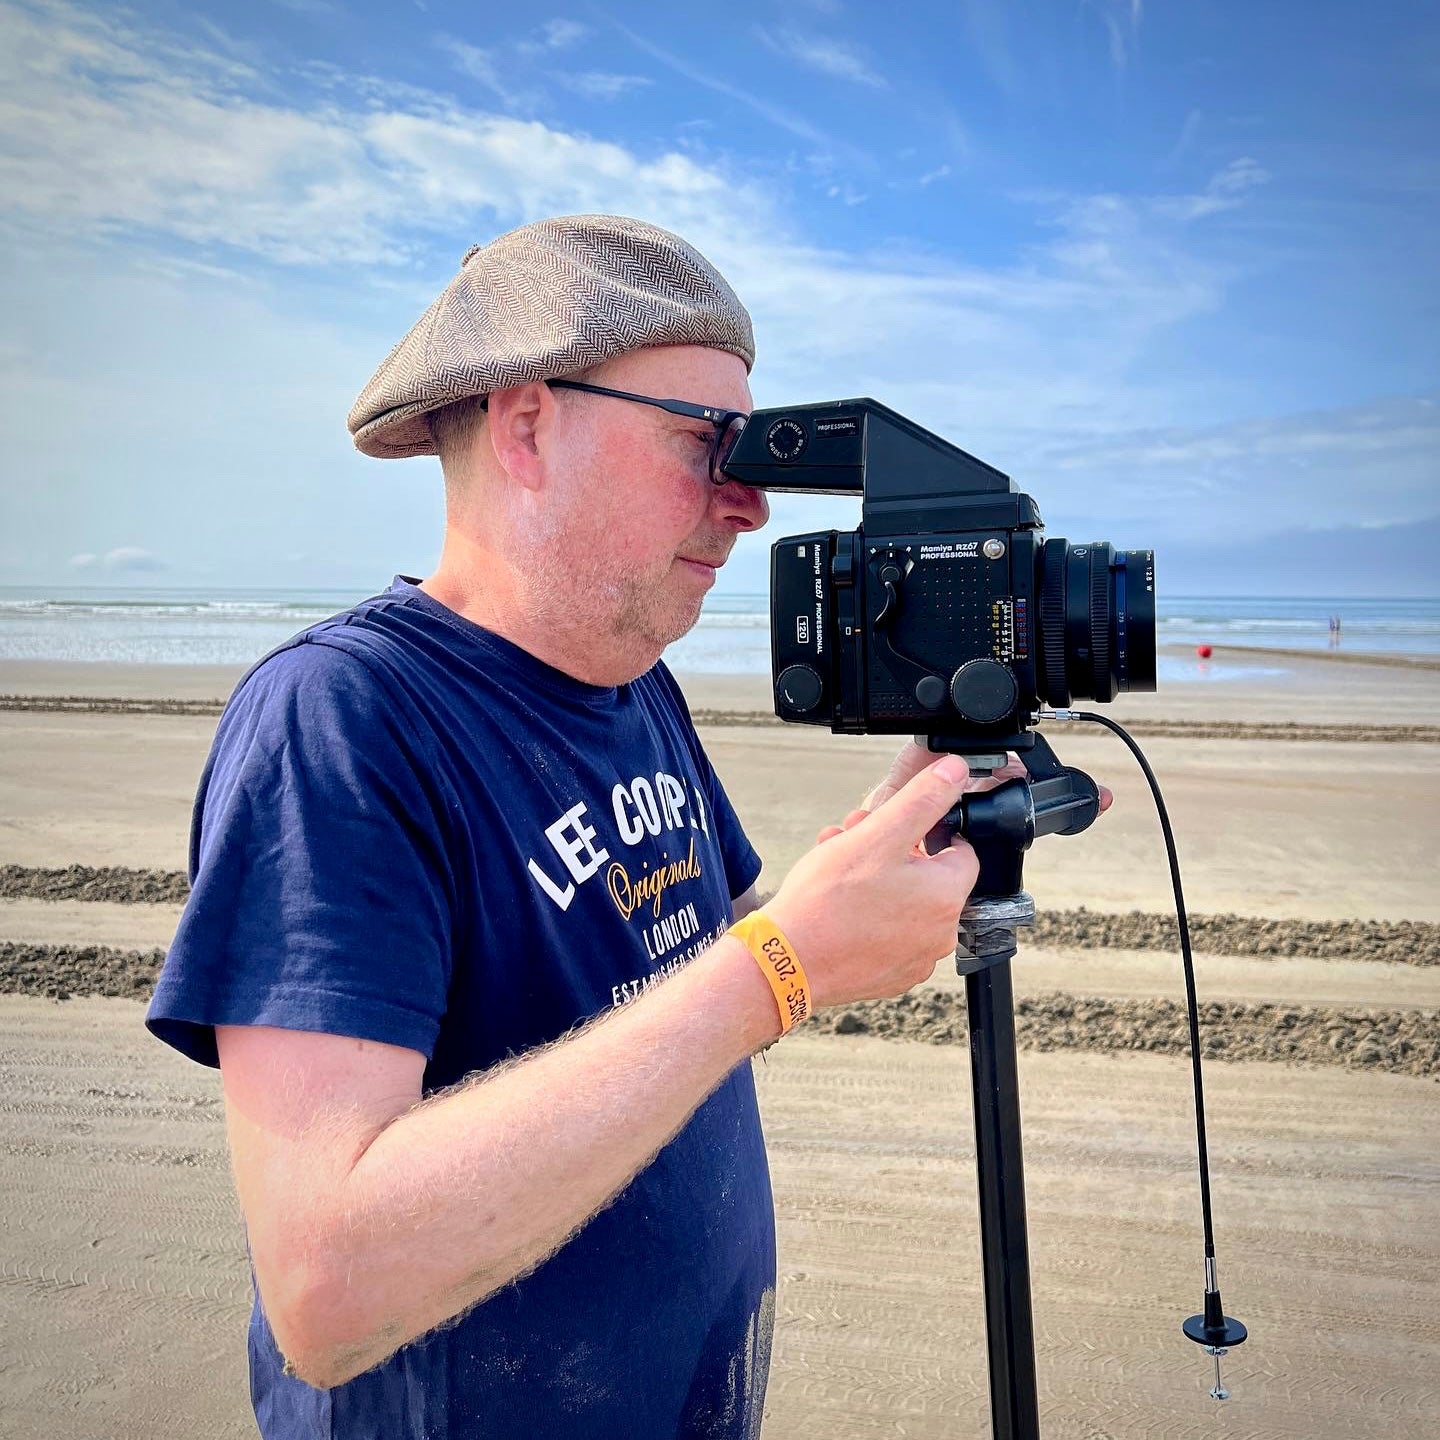 Richard Heeps photographing on Pendine Sands beach with a vintage analogue Mamiya RZ67 camera.